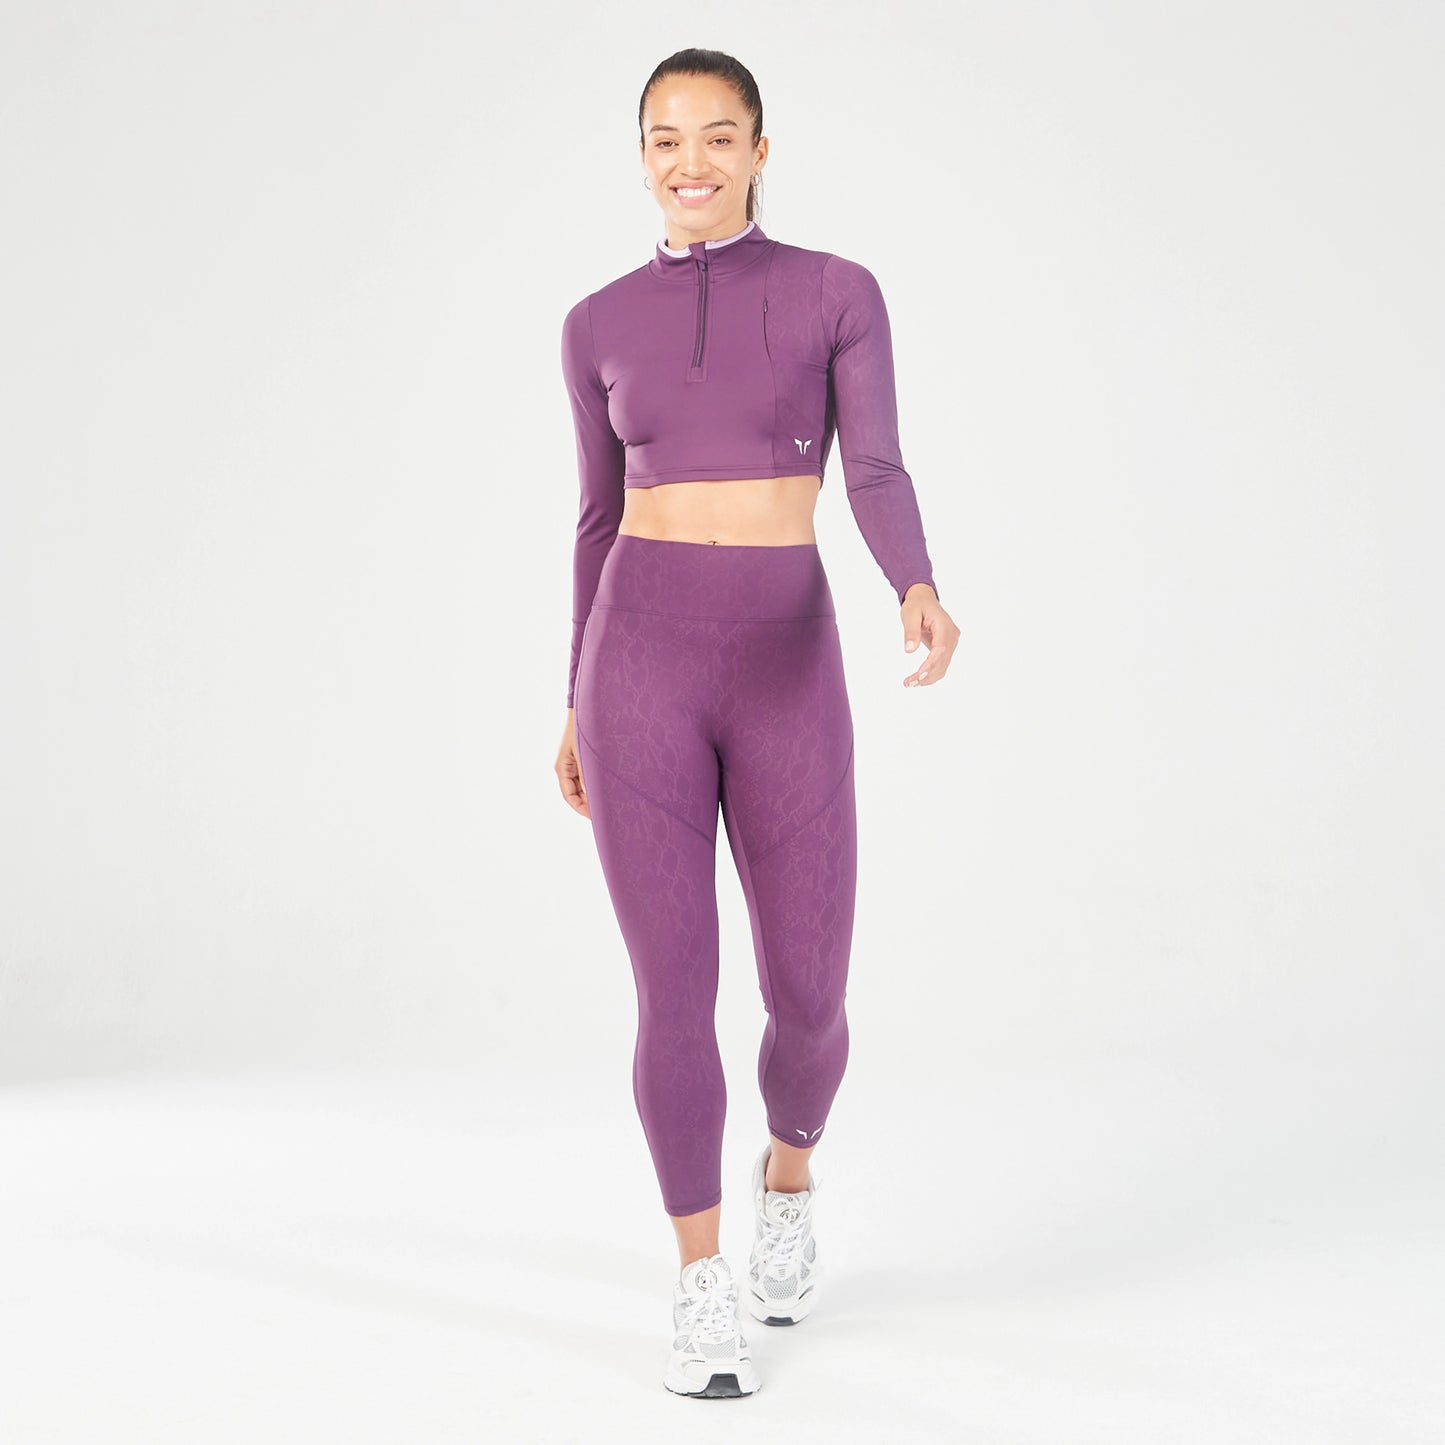 squatwolf-workout-clothes-qtr-zip-serpent-top-shadow-purple-gym-t-shirts-for-women